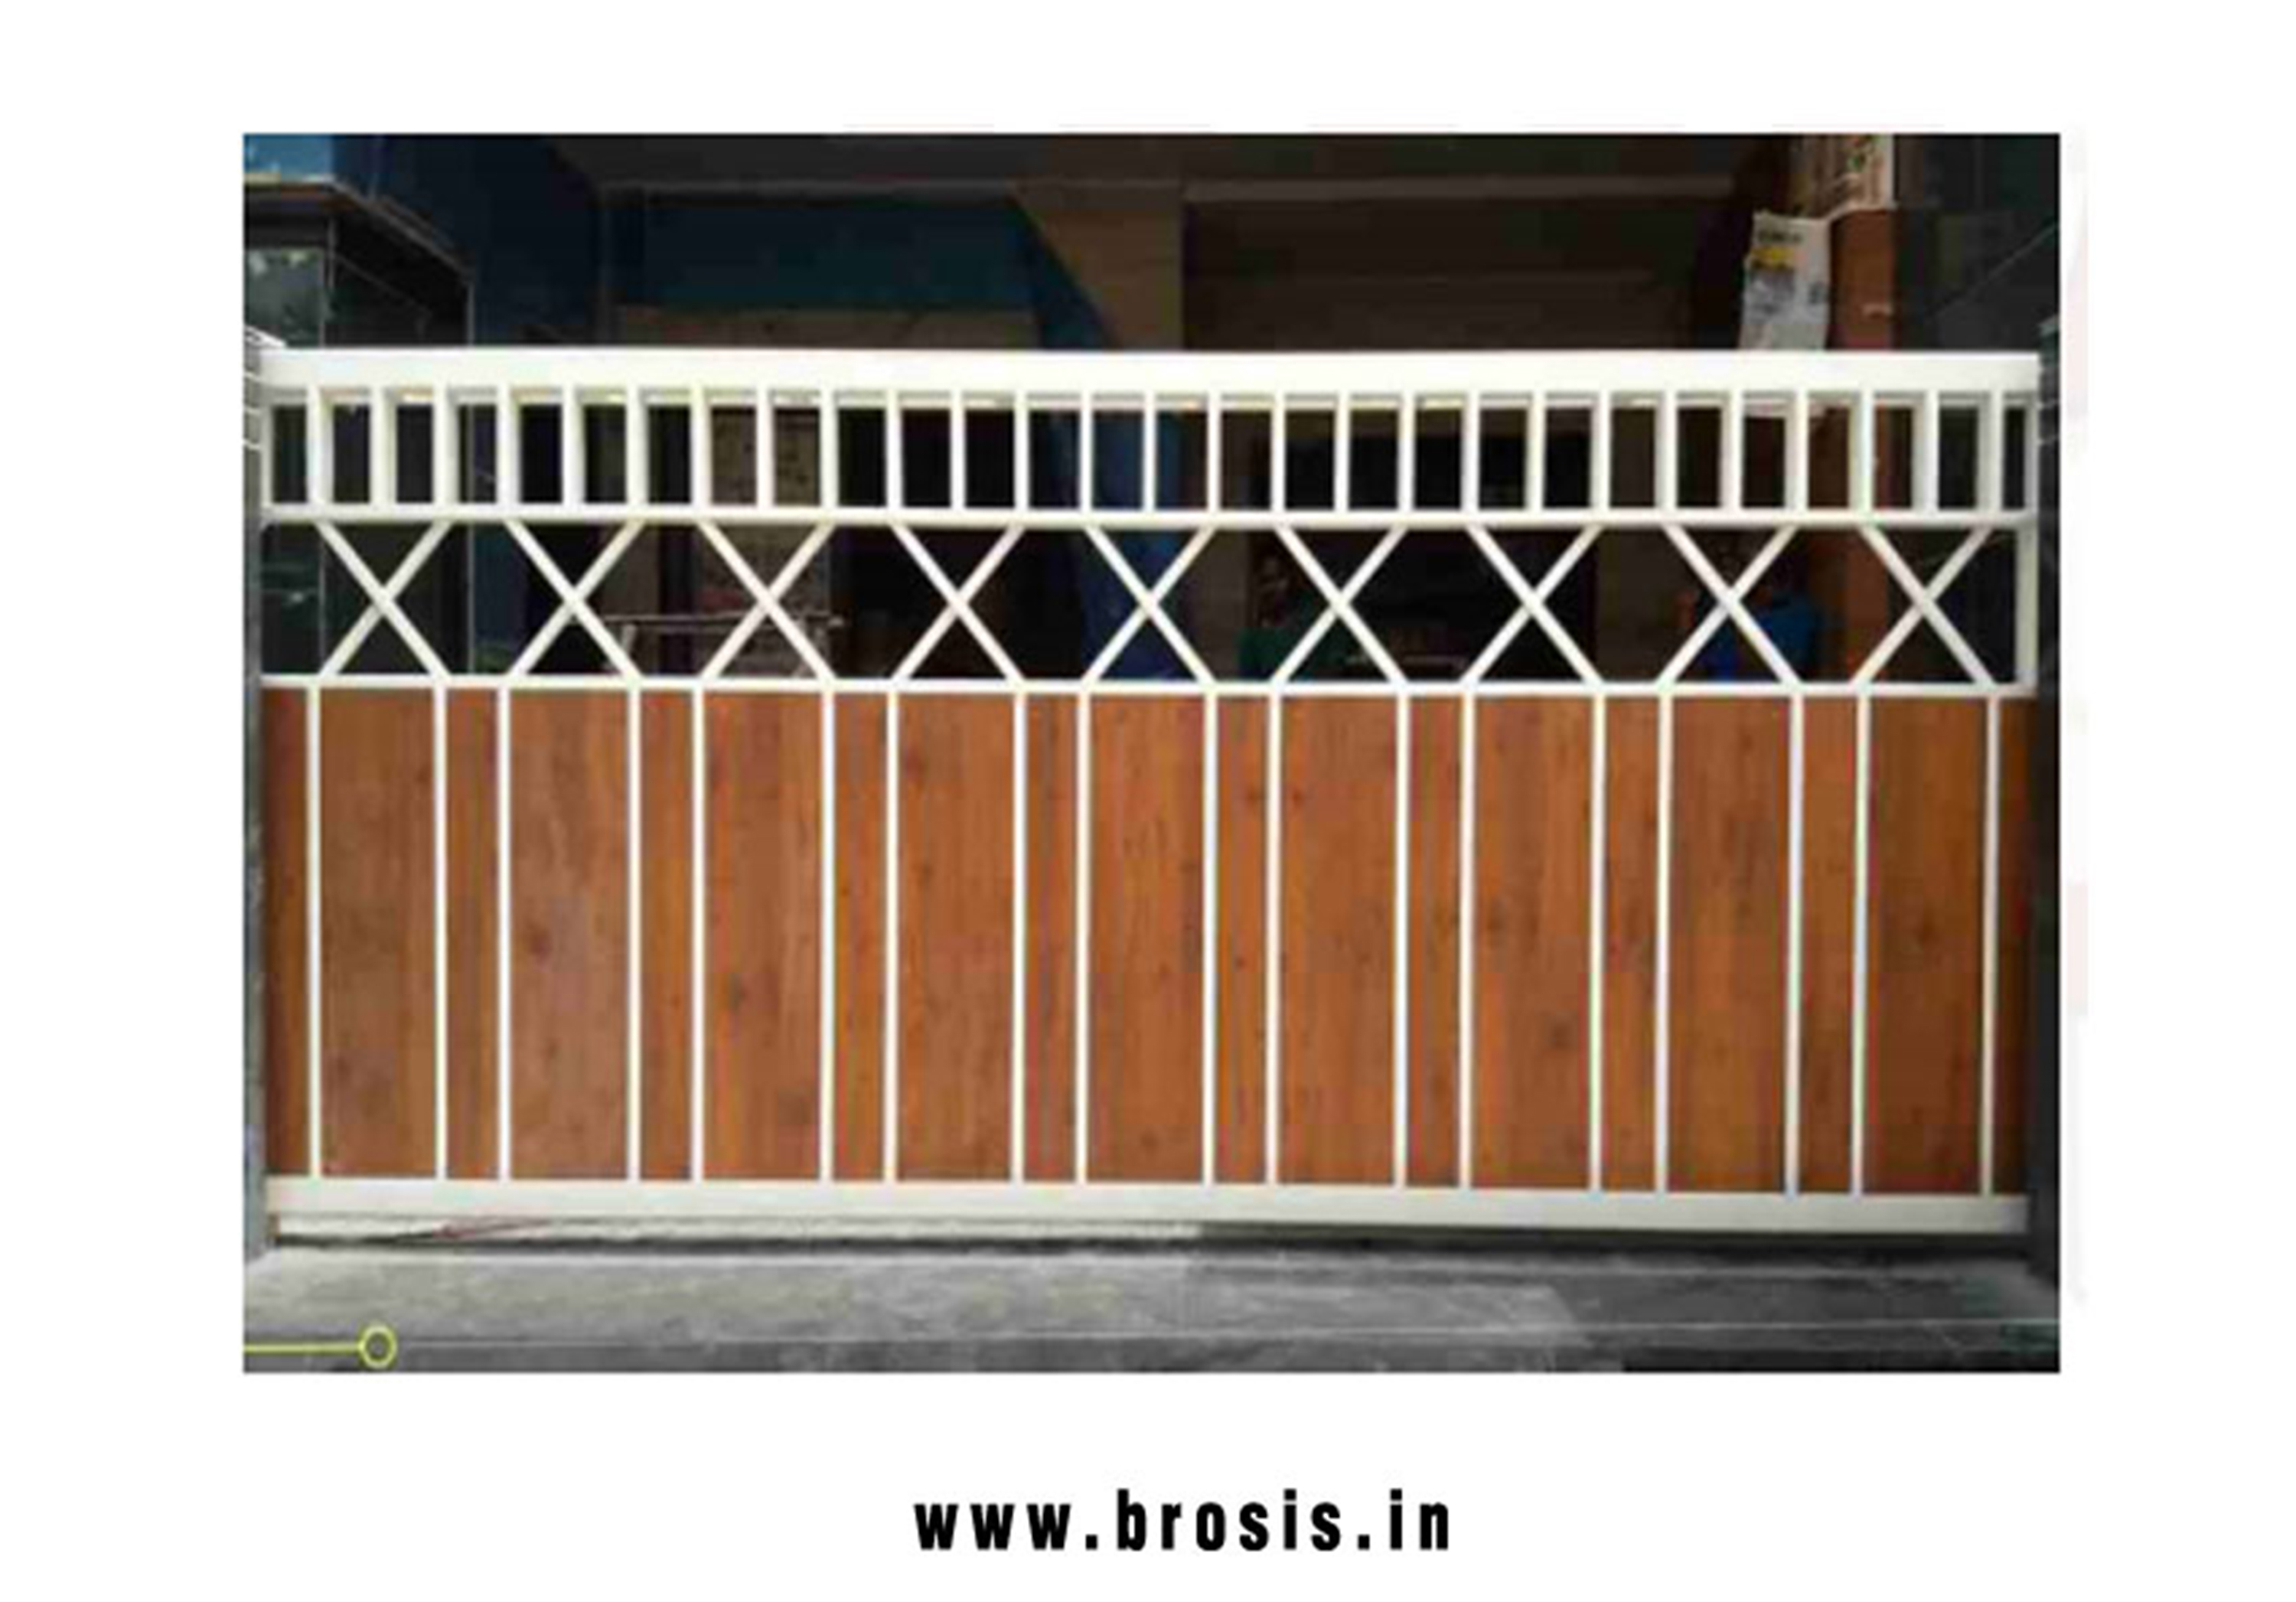 Cantilever Sliding Gate manufacturers exporters in India Punjab Ludhiana